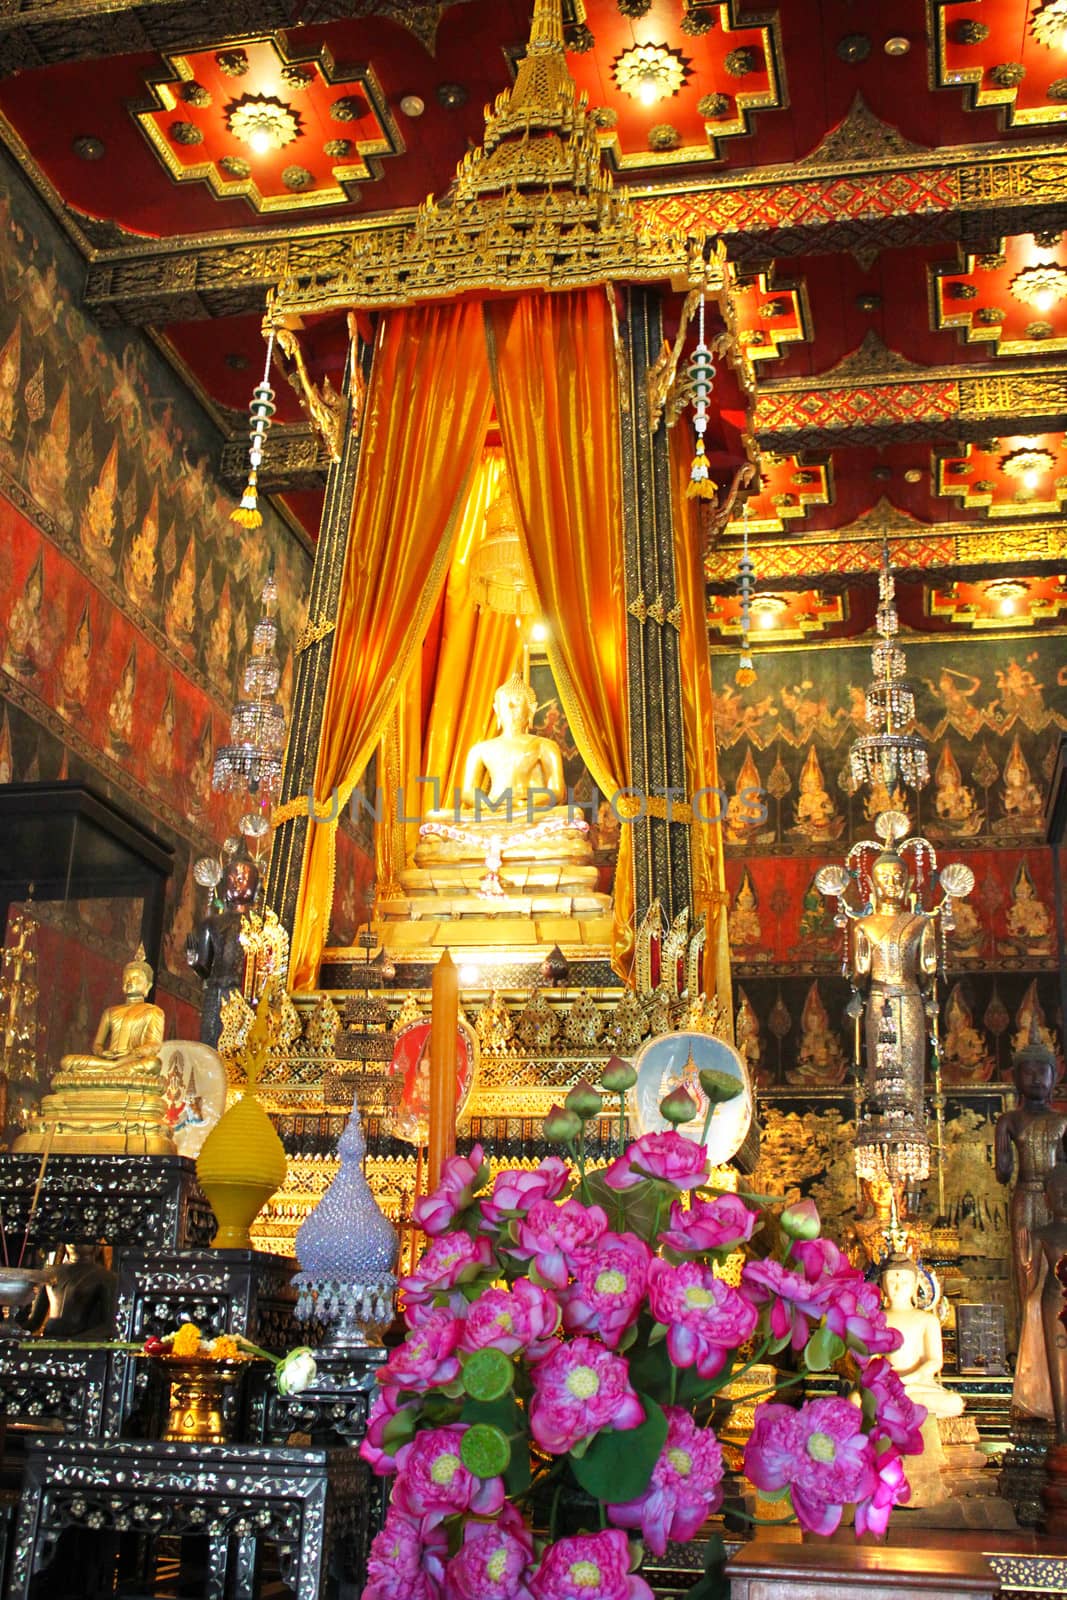 An altar with a golden buddha and lutus blossoms in a Bangkok buddist temple.